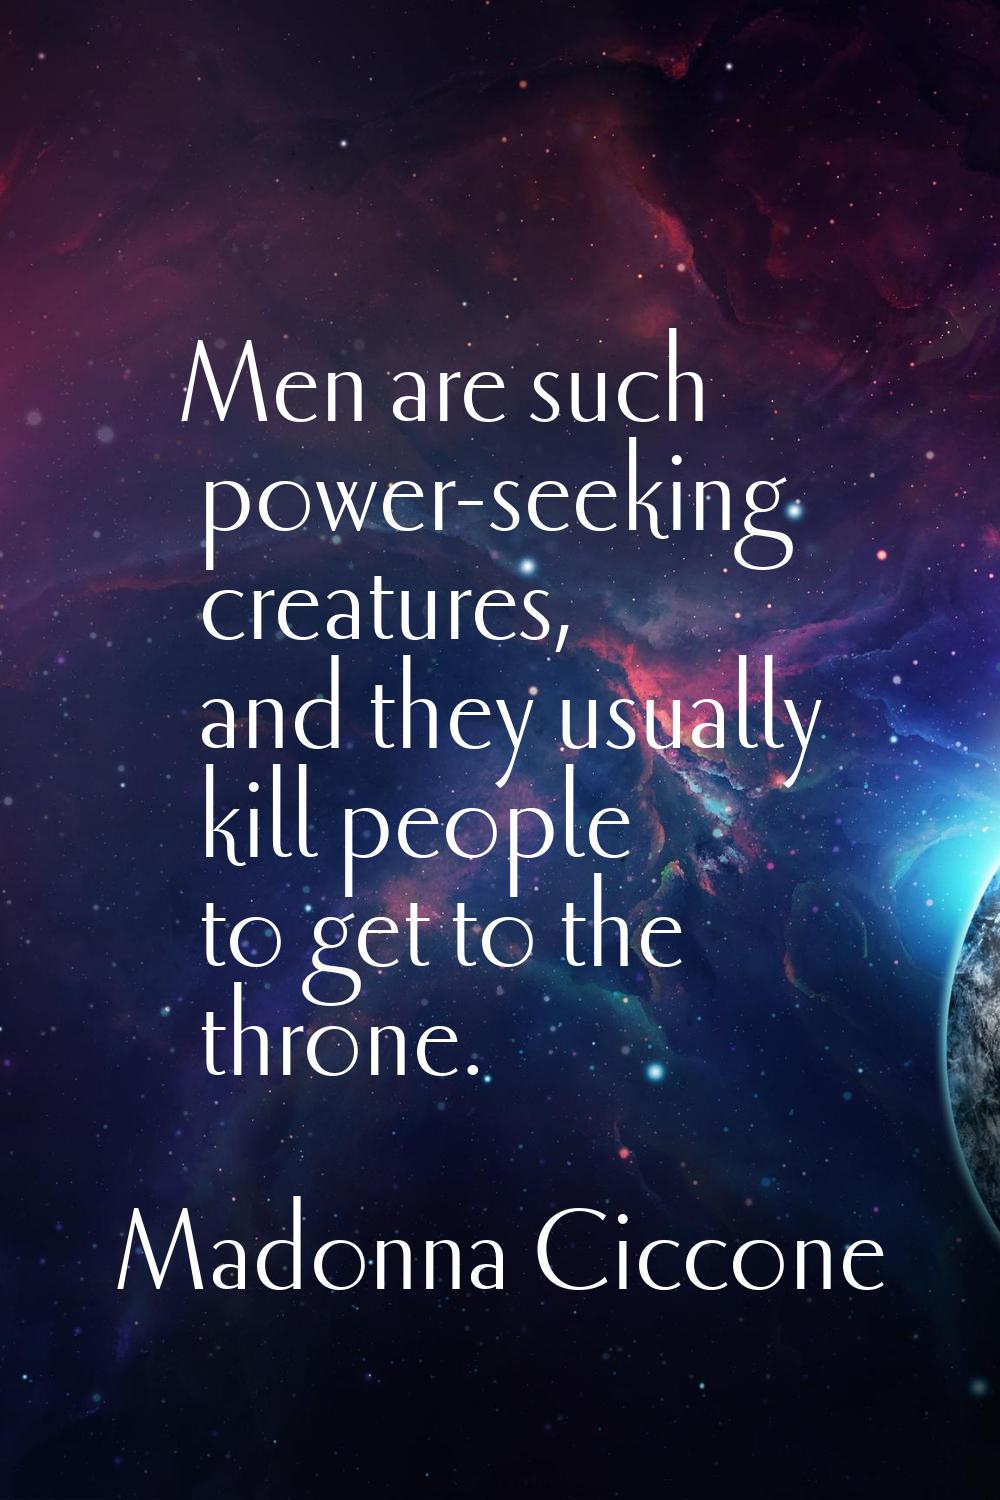 Men are such power-seeking creatures, and they usually kill people to get to the throne.